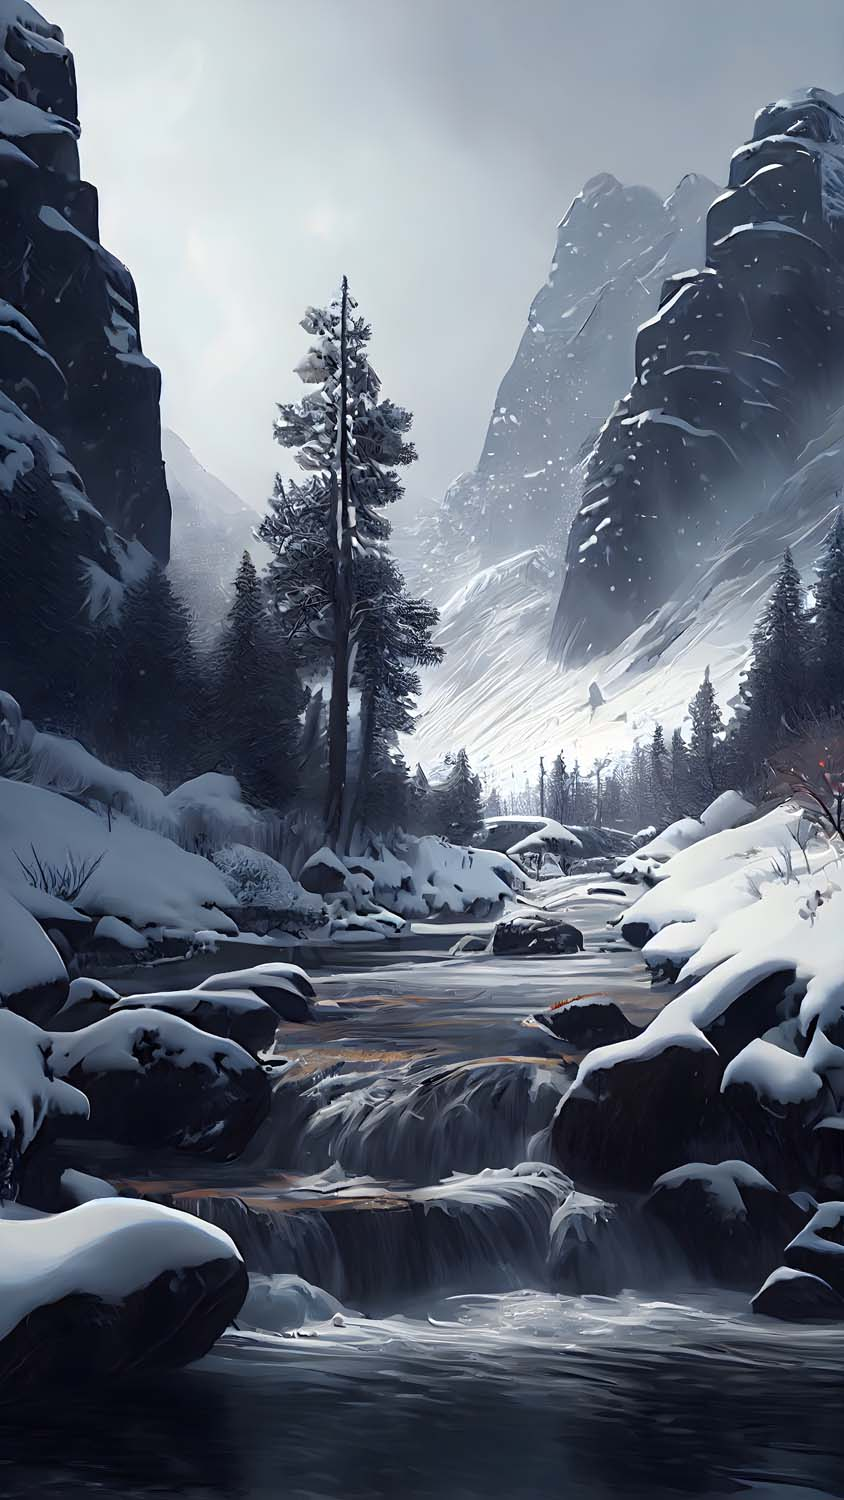 Snow River IPhone Wallpaper HD  IPhone Wallpapers